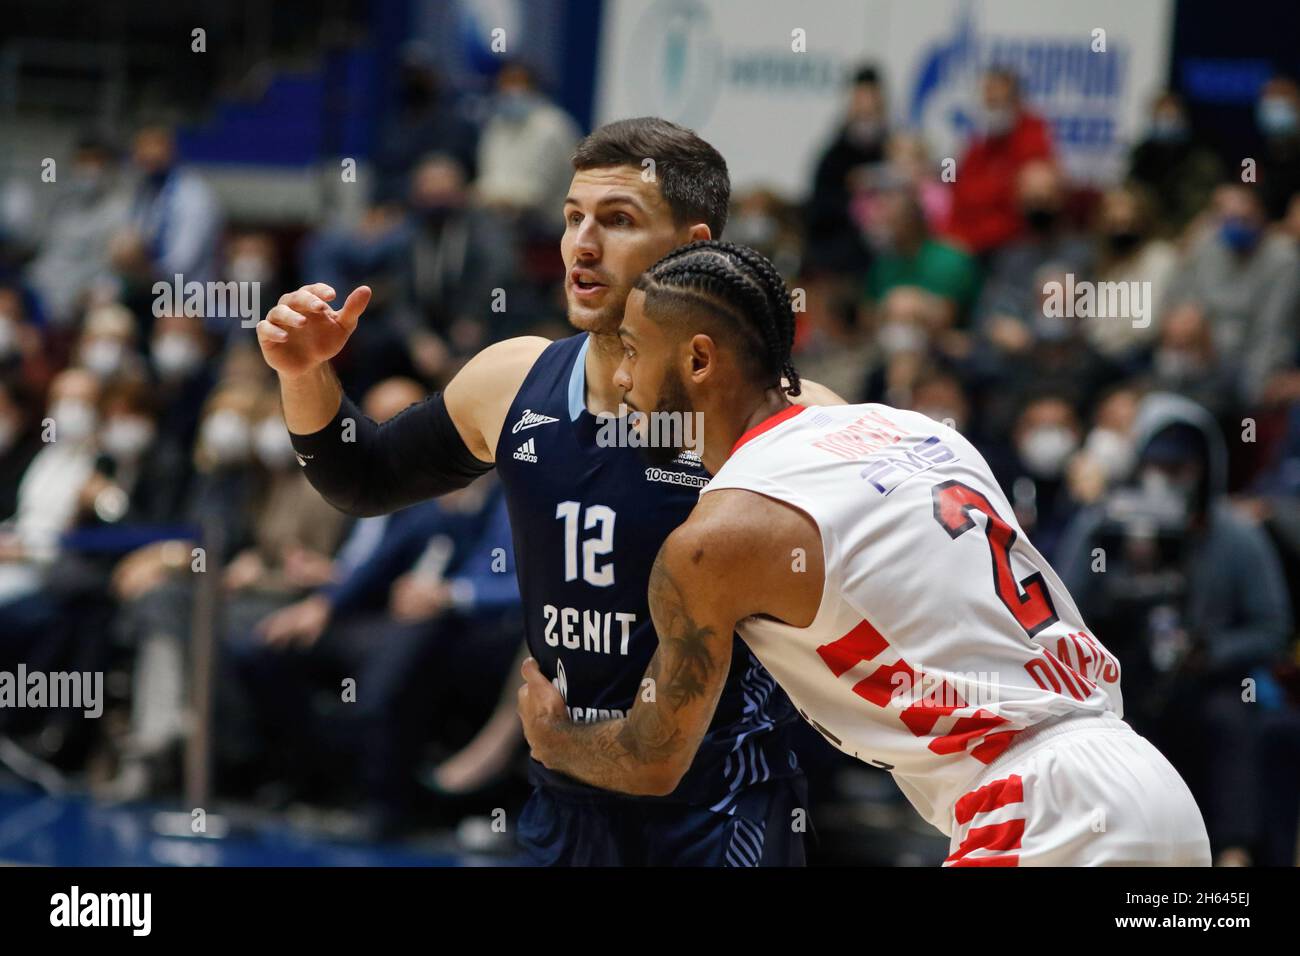 Billy Baron (L) of Zenit and Tyler Dorsey (R) of Olympiacos seen in action  during the Turkish Airlines Euroleague basketball match between Zenit Saint  Petersburg and Olympiacos Piraeus at Sibur Arena in